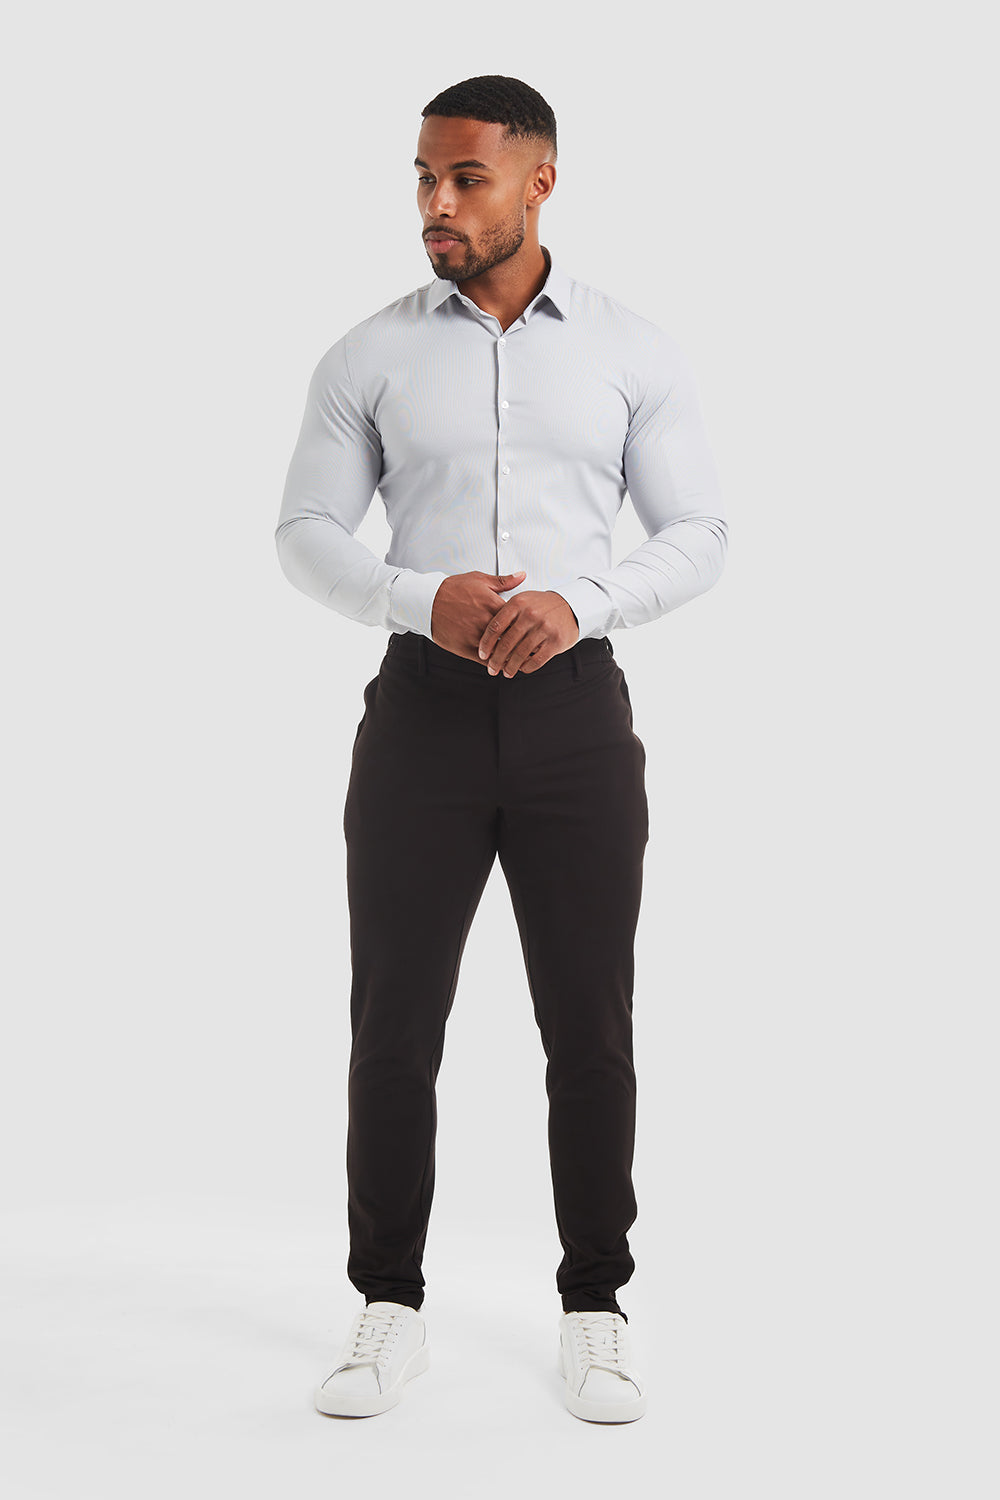 Performance Business Shirt in Navy Stripe - TAILORED ATHLETE - ROW